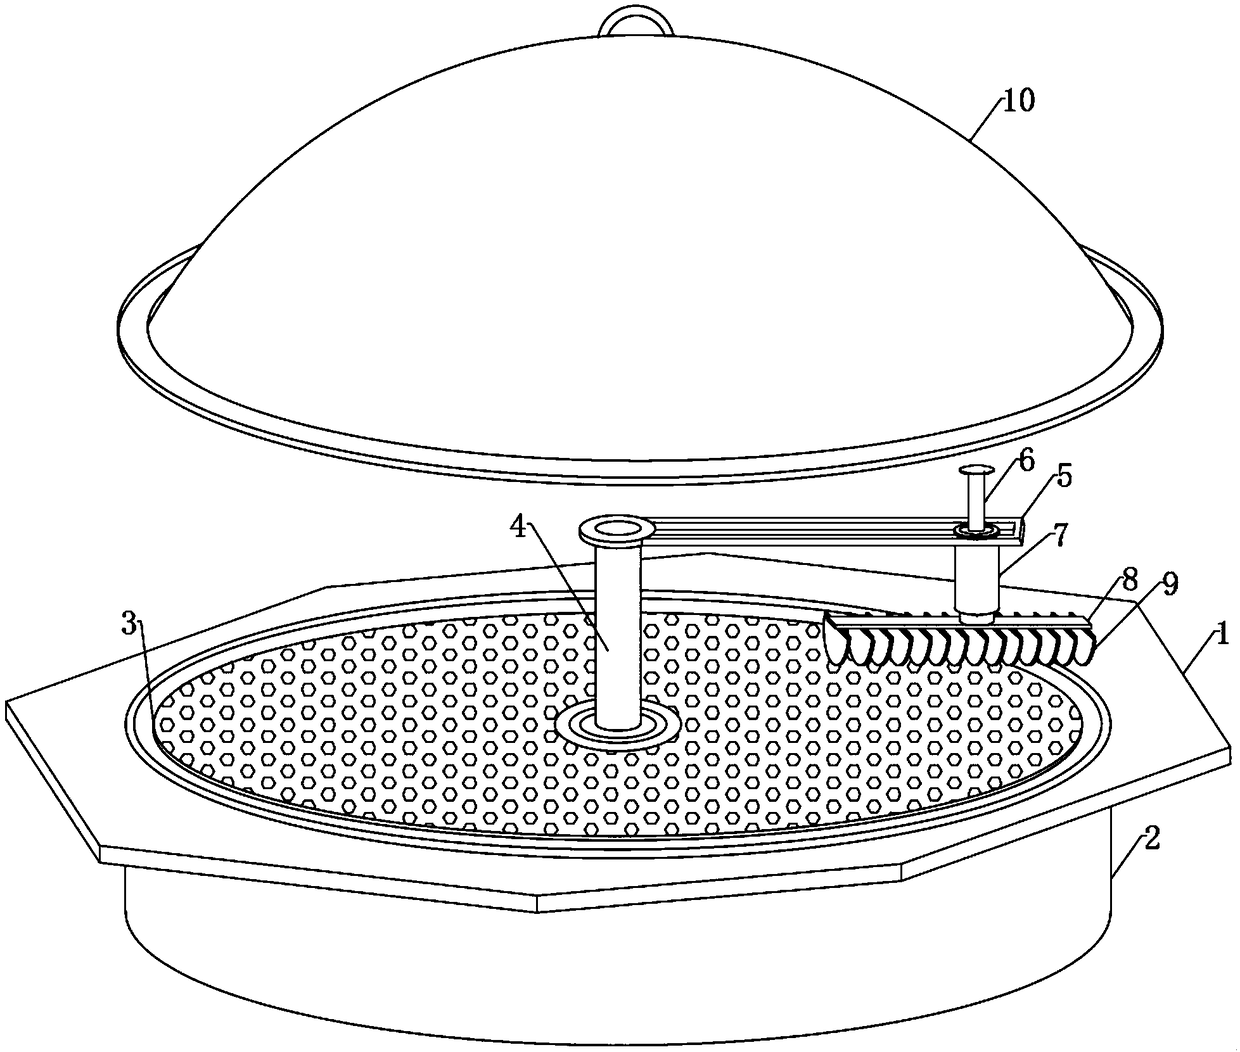 A kind of artificial slicing device for ginseng